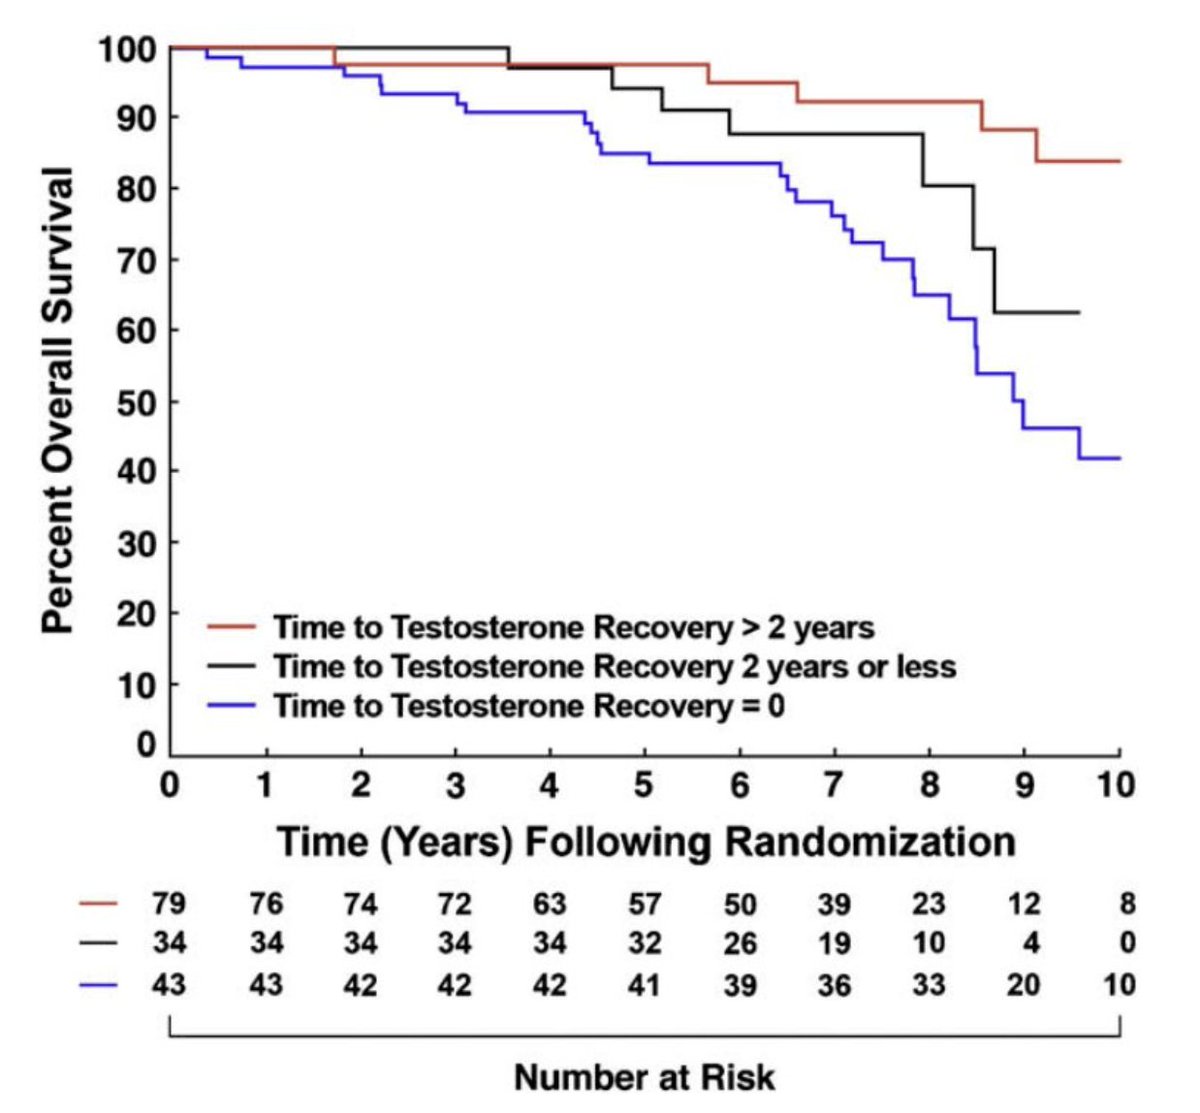 Testosterone recovery after stopping ADT – who is at risk for long-term non-recovery? Presented by @PBlanchardMD @GustaveRoussy. #APCCC24 Written coverage by @zklaassen_md @GACancerCenter @mcg_urology. > bit.ly/4aVAN1S @APCCC_Lugano